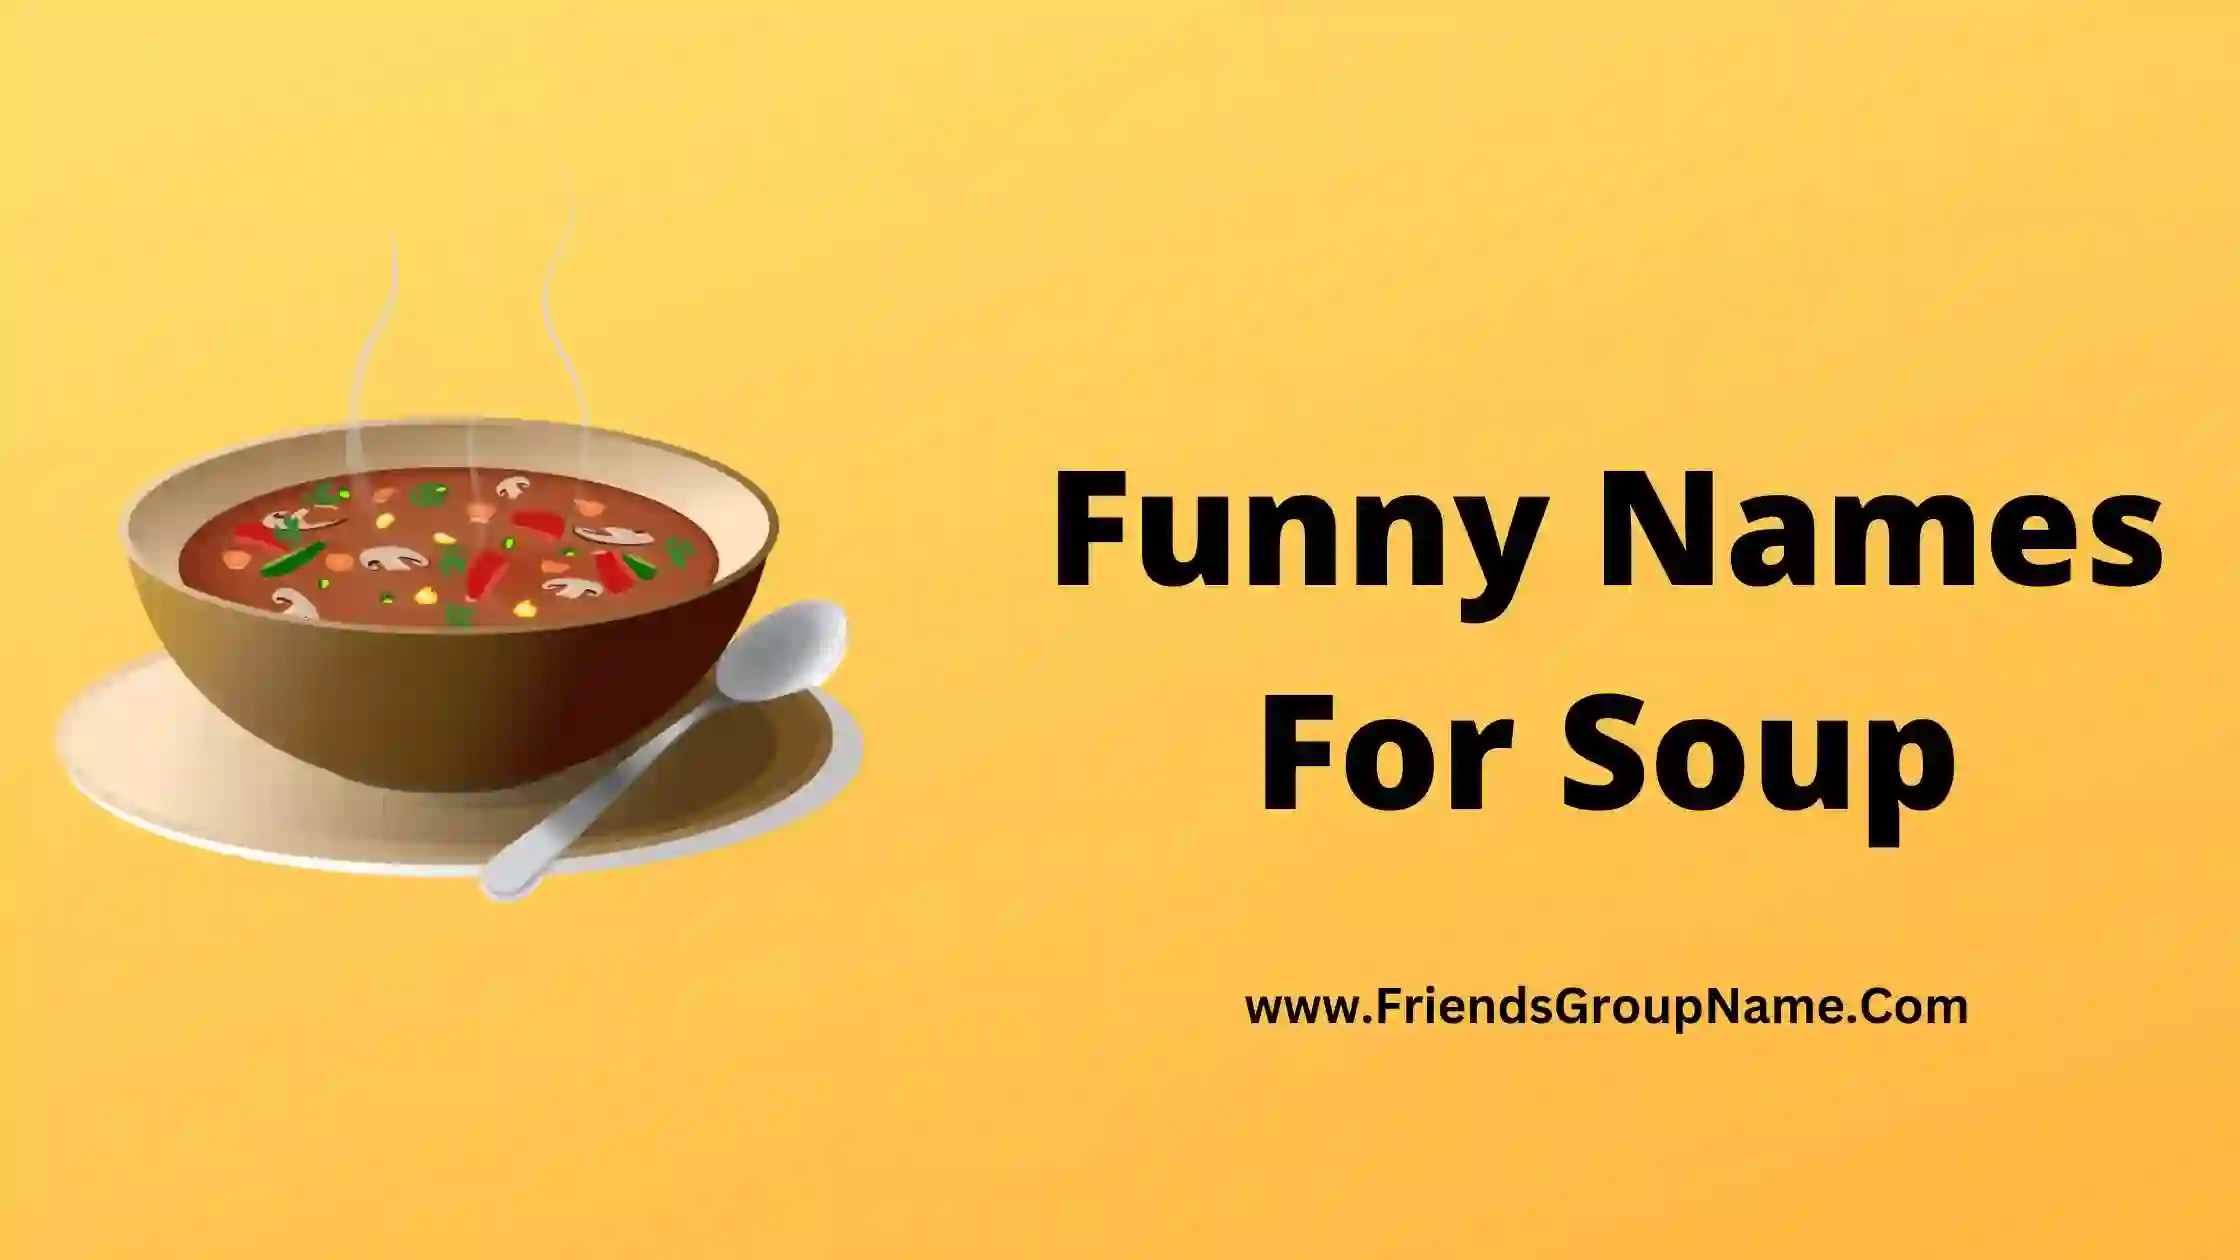 Funny Names For Soup